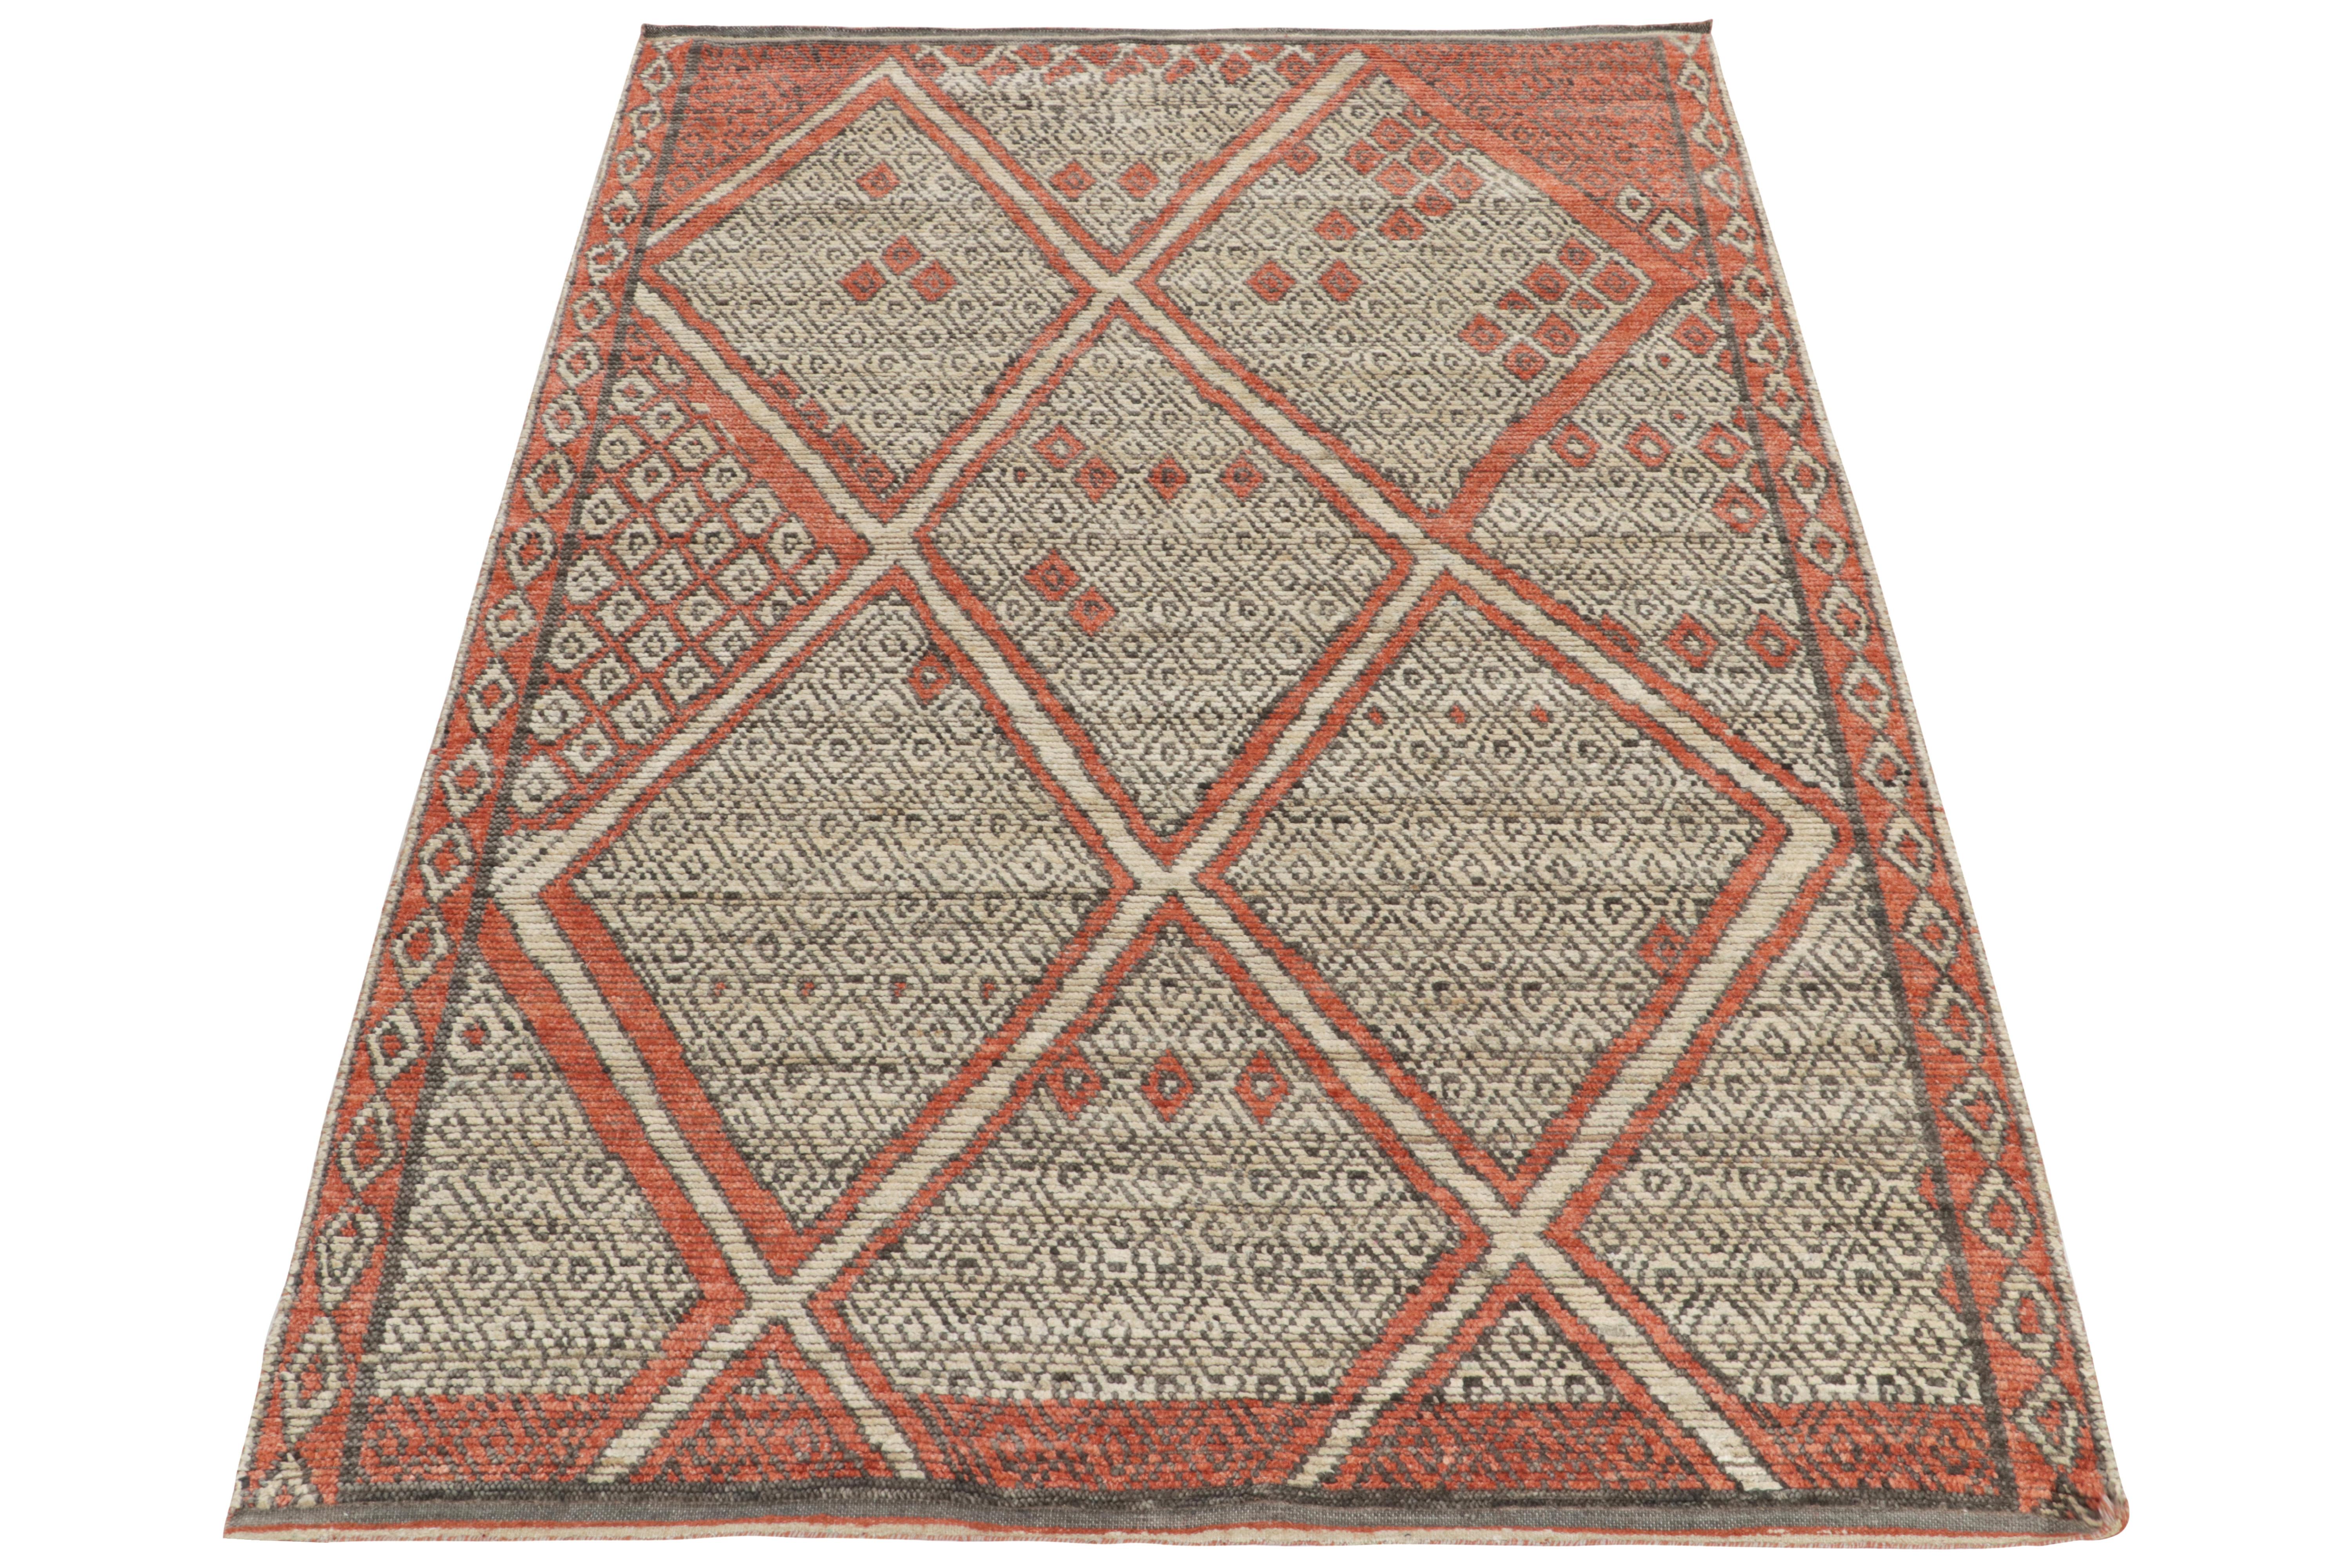 Hand-knotted in fine, luxurious silk, a 6x9 Moroccan style piece from Rug & Kilim. The imagination enjoys scintillating pagination with the idyllic diamond patterns in tangerine, white & black. Marking a bold contemporary take in such rich tribal